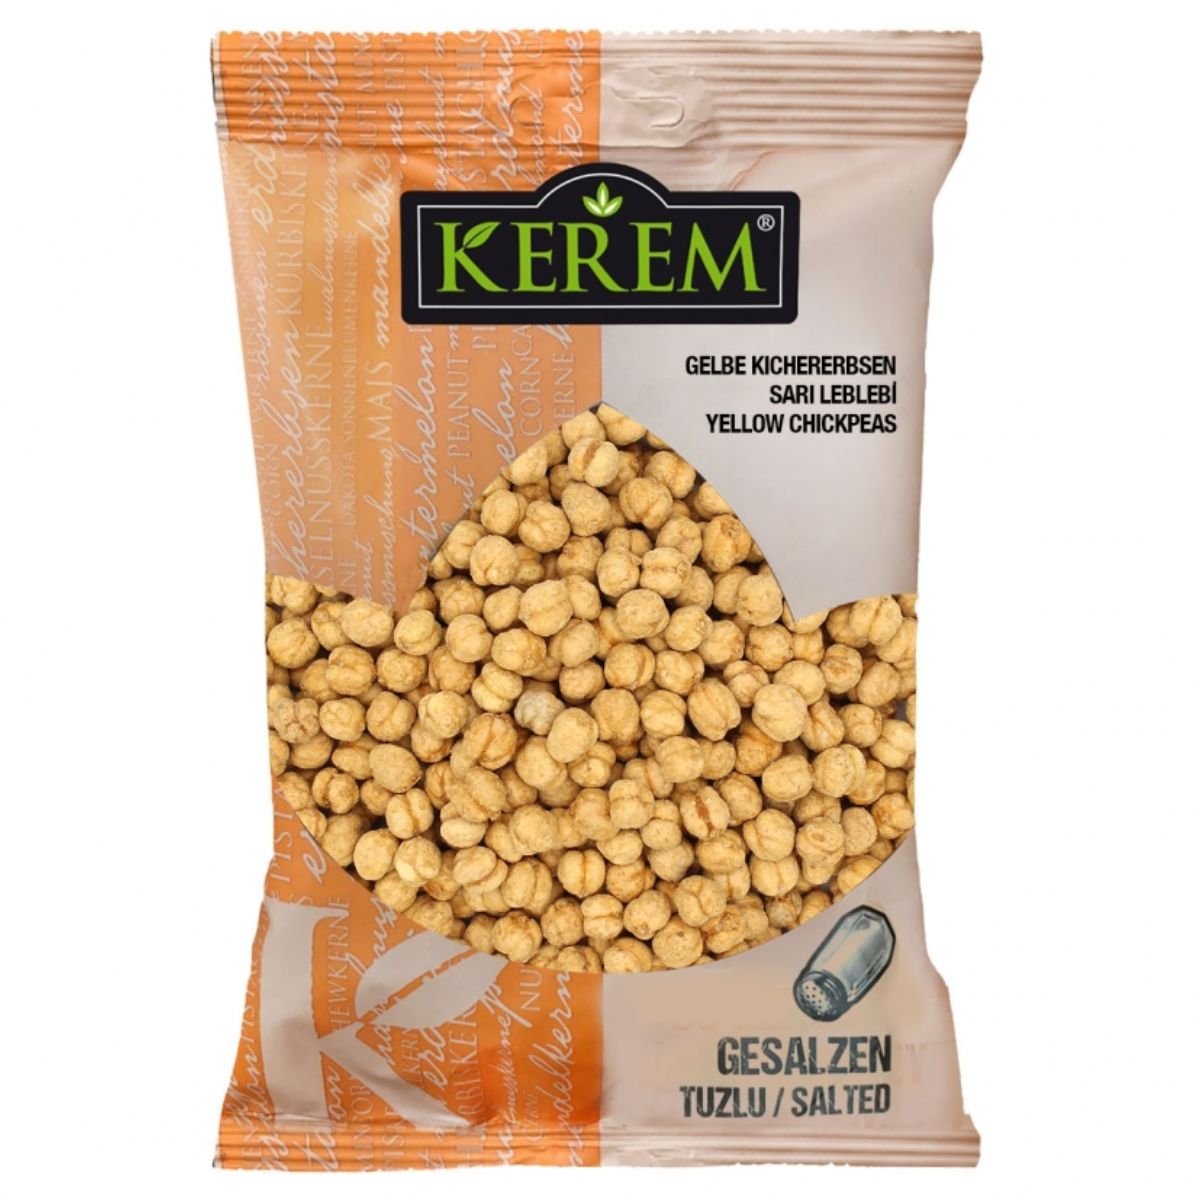 Kerem - Yellow Chickpeas - 225g in a bag on a white background.